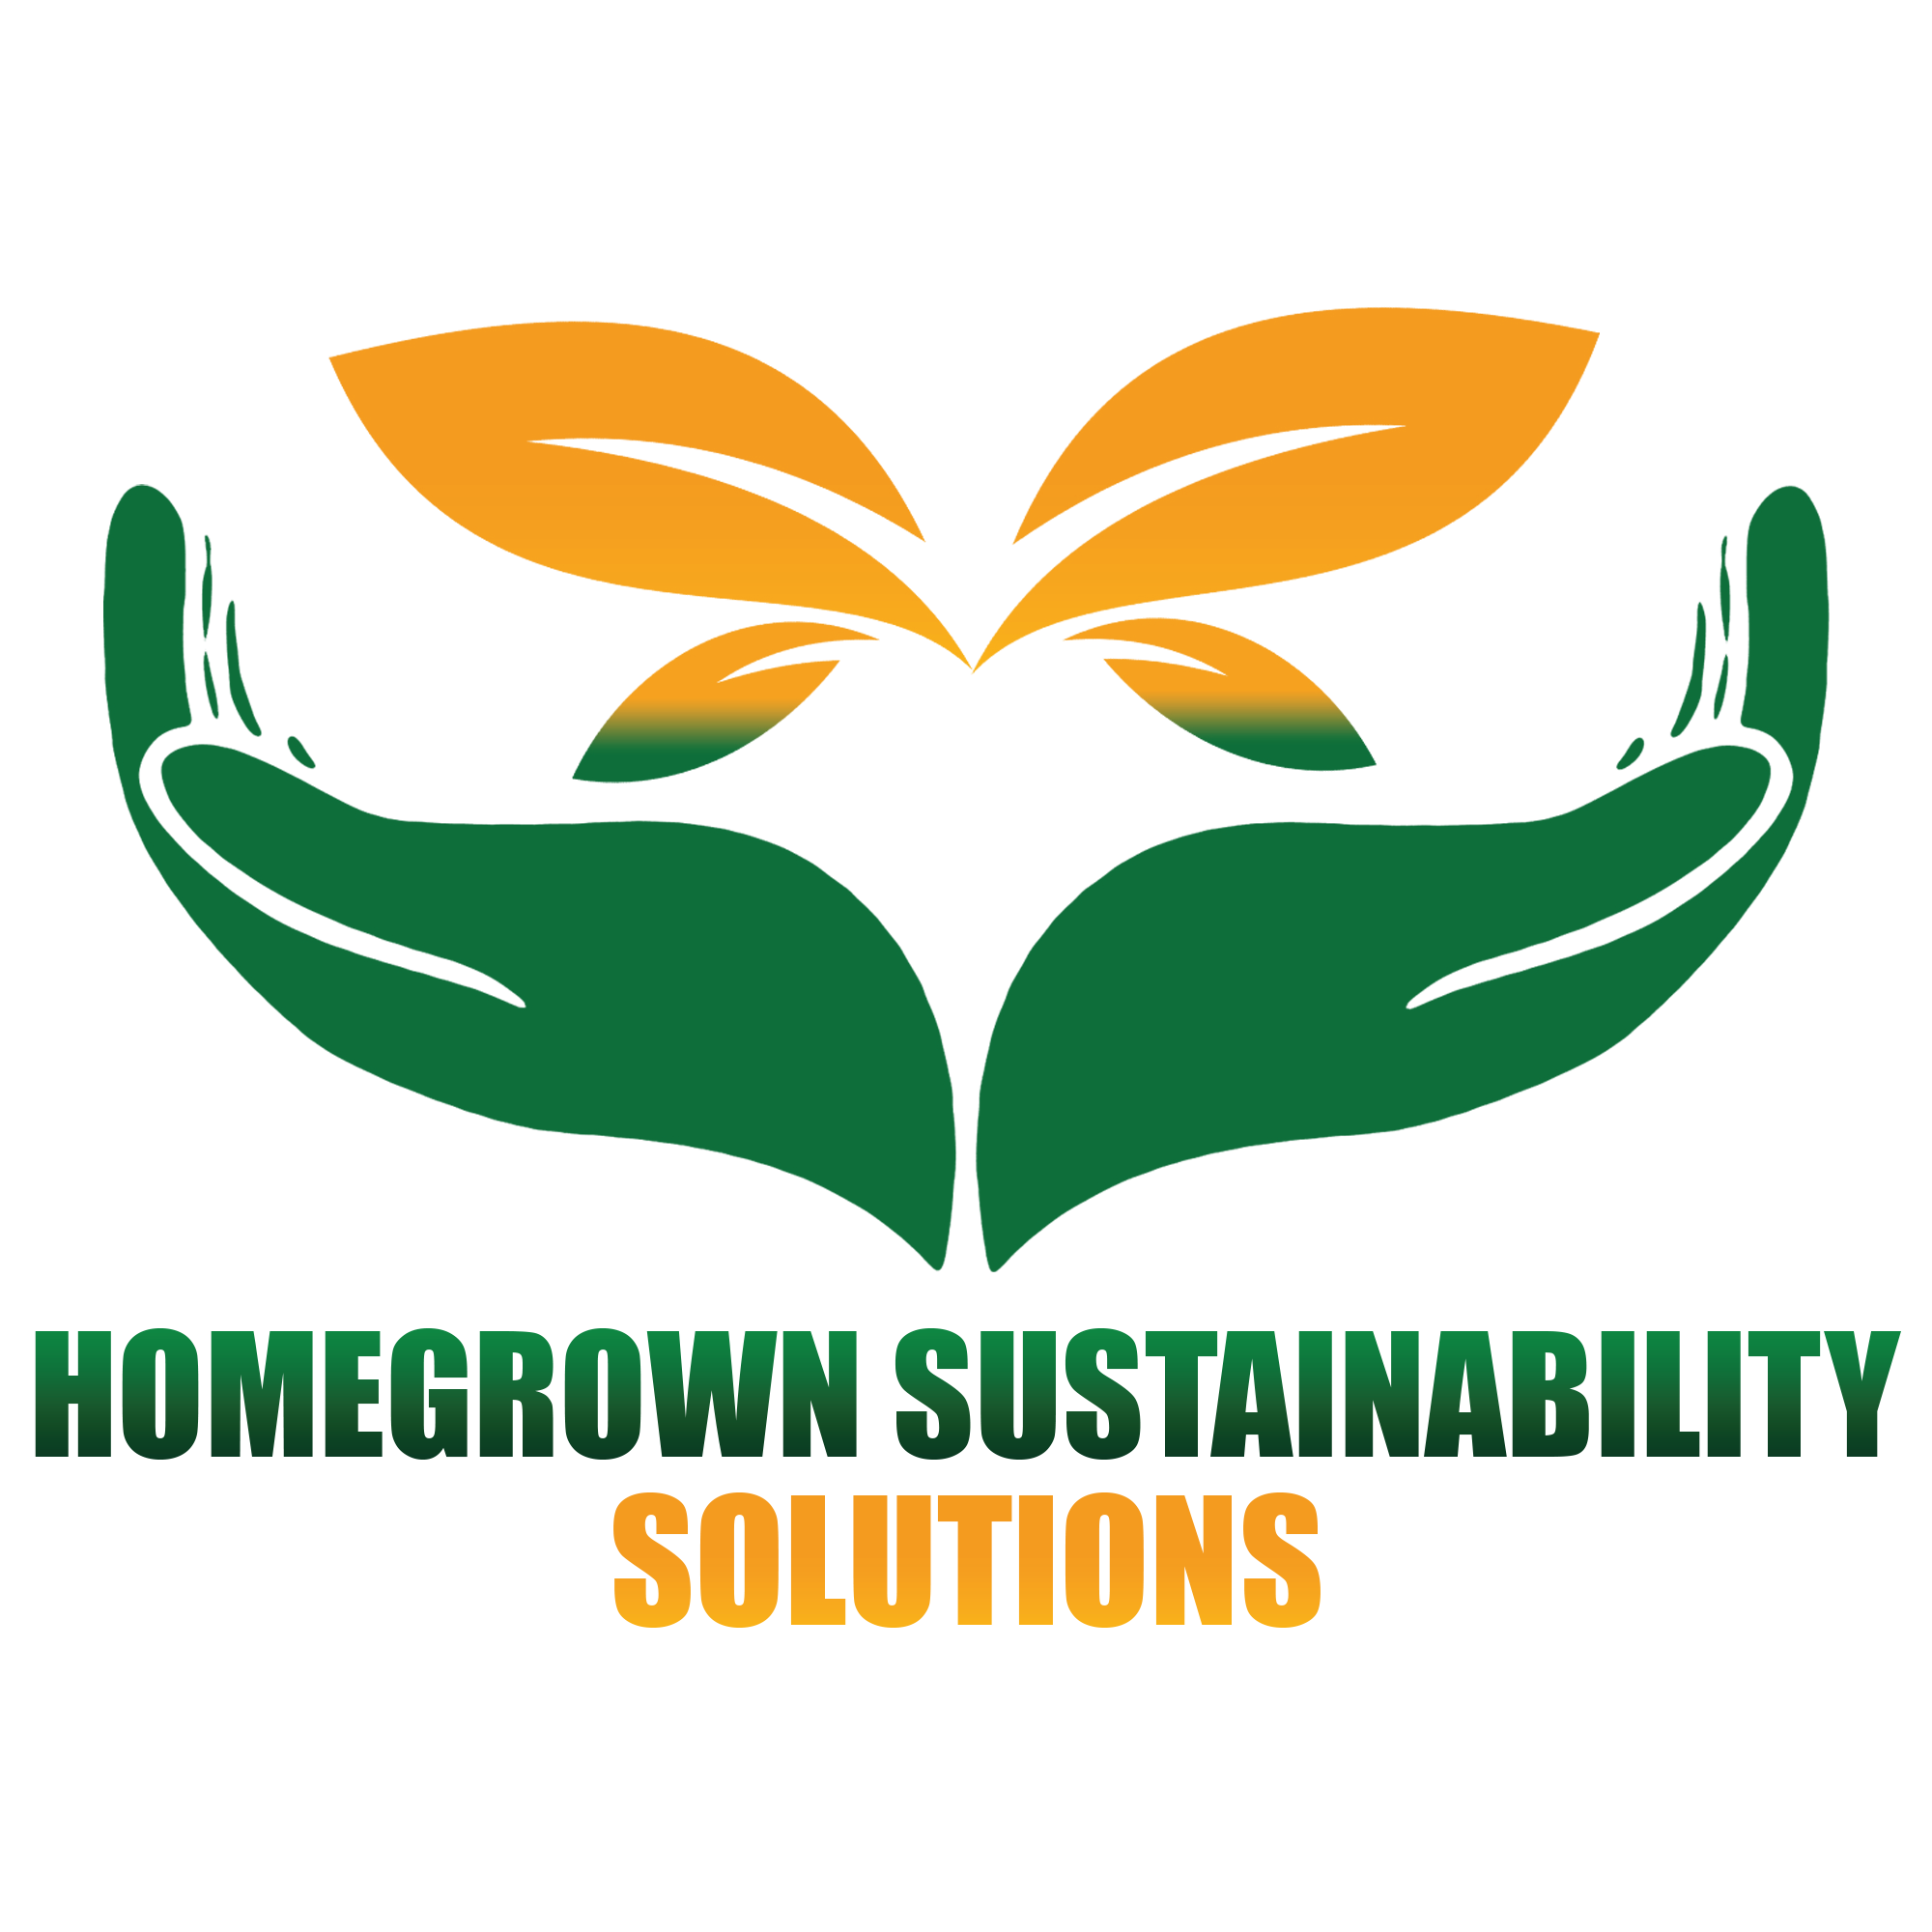 Homegrown Sustainability Solutions